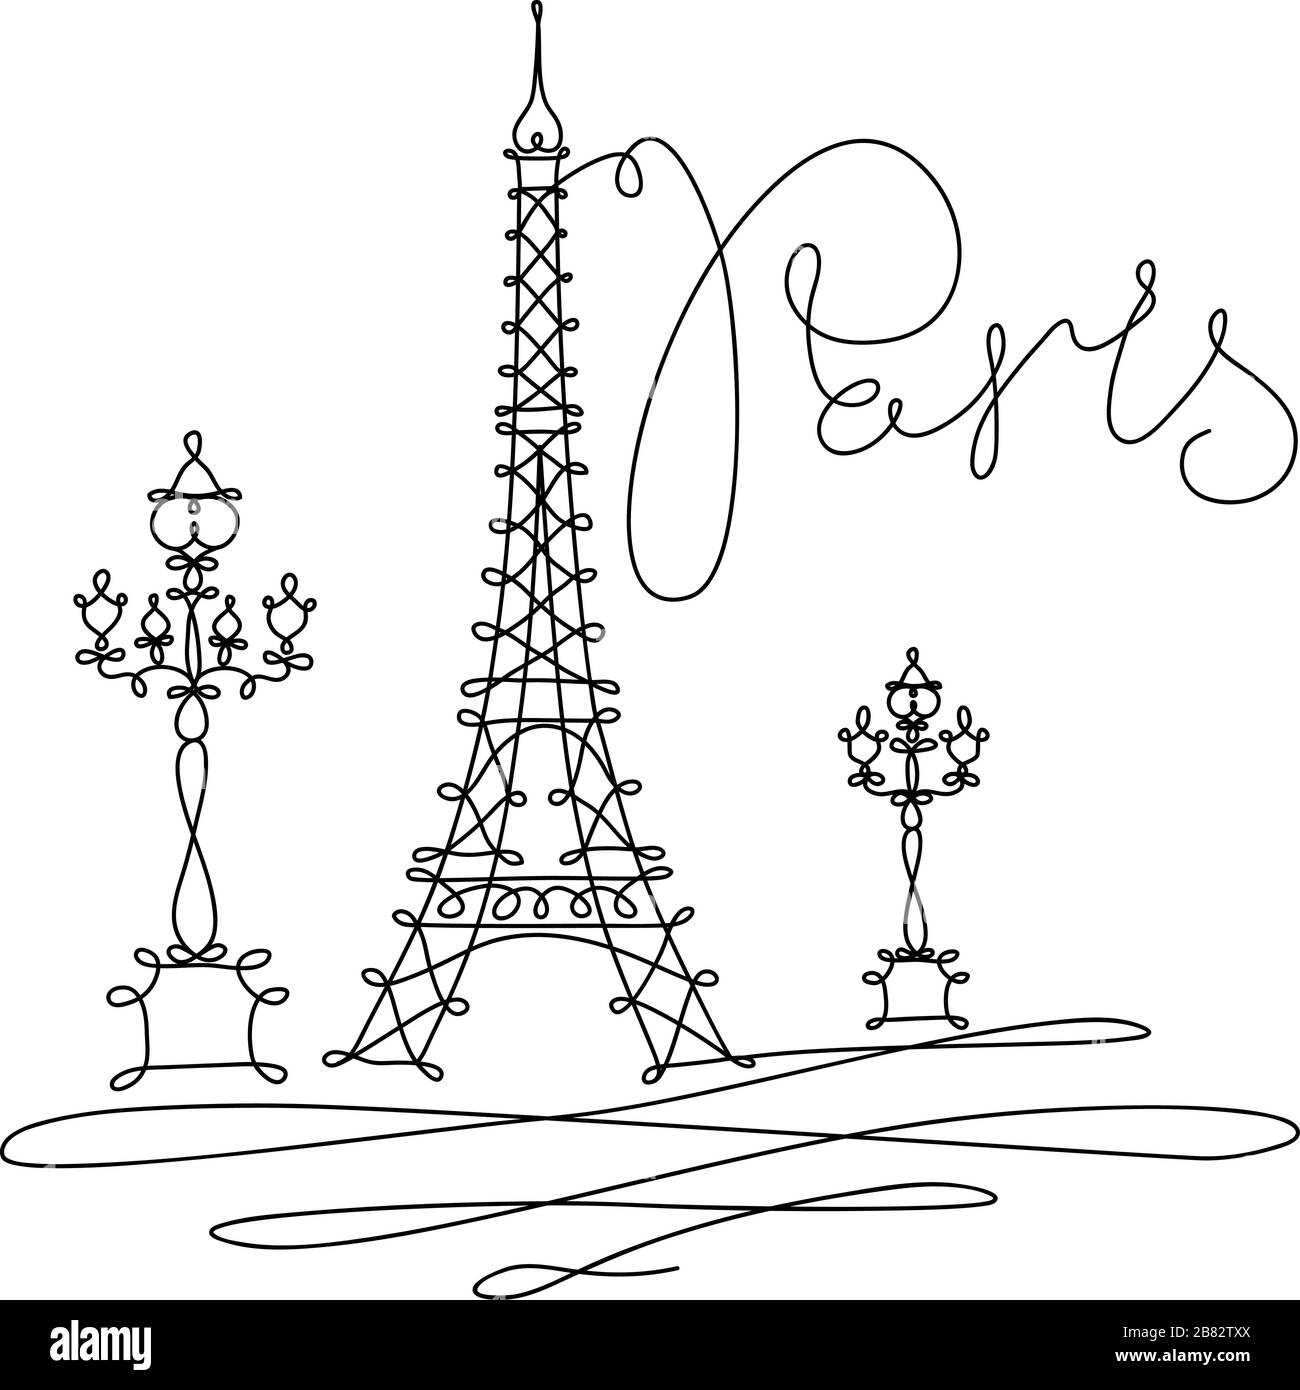 How to Draw The Eiffel Tower: Narrated Step by Step - YouTube